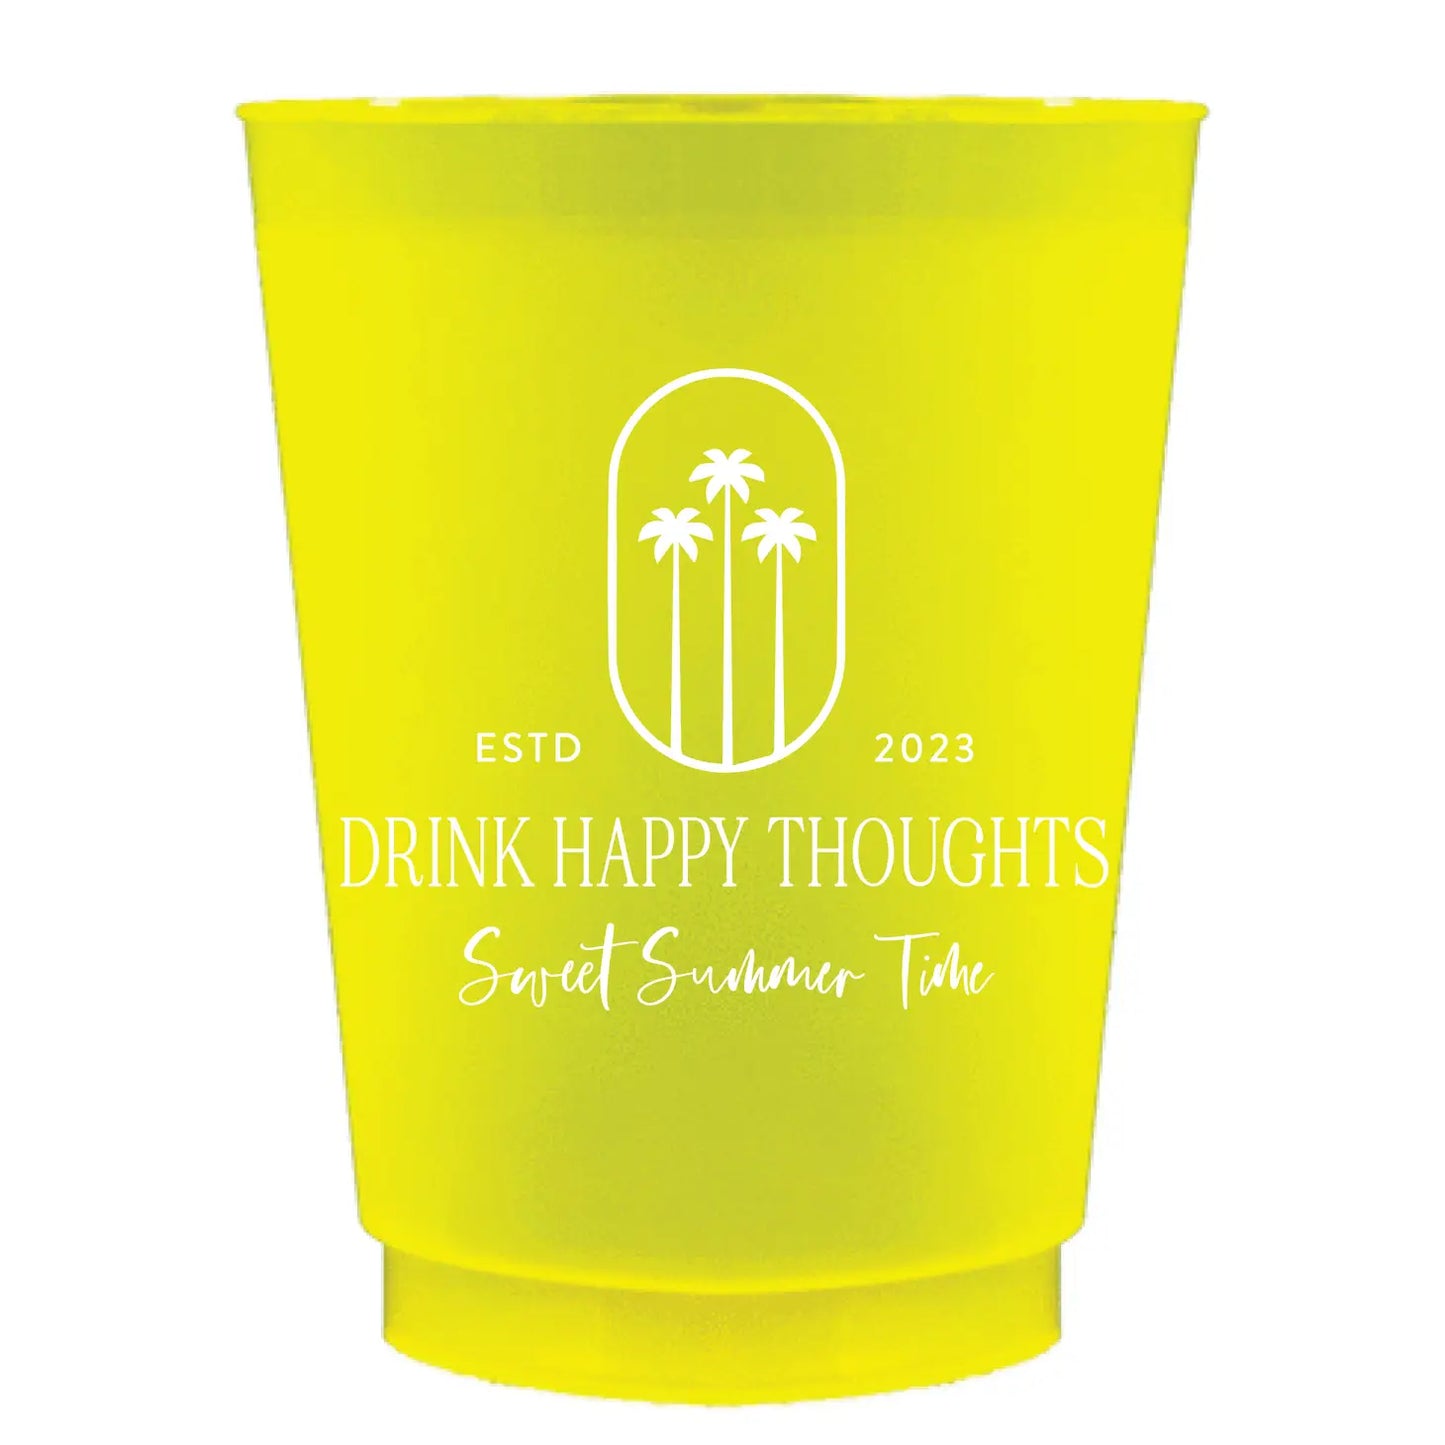 Drink Happy Thoughts 6 pk Cups